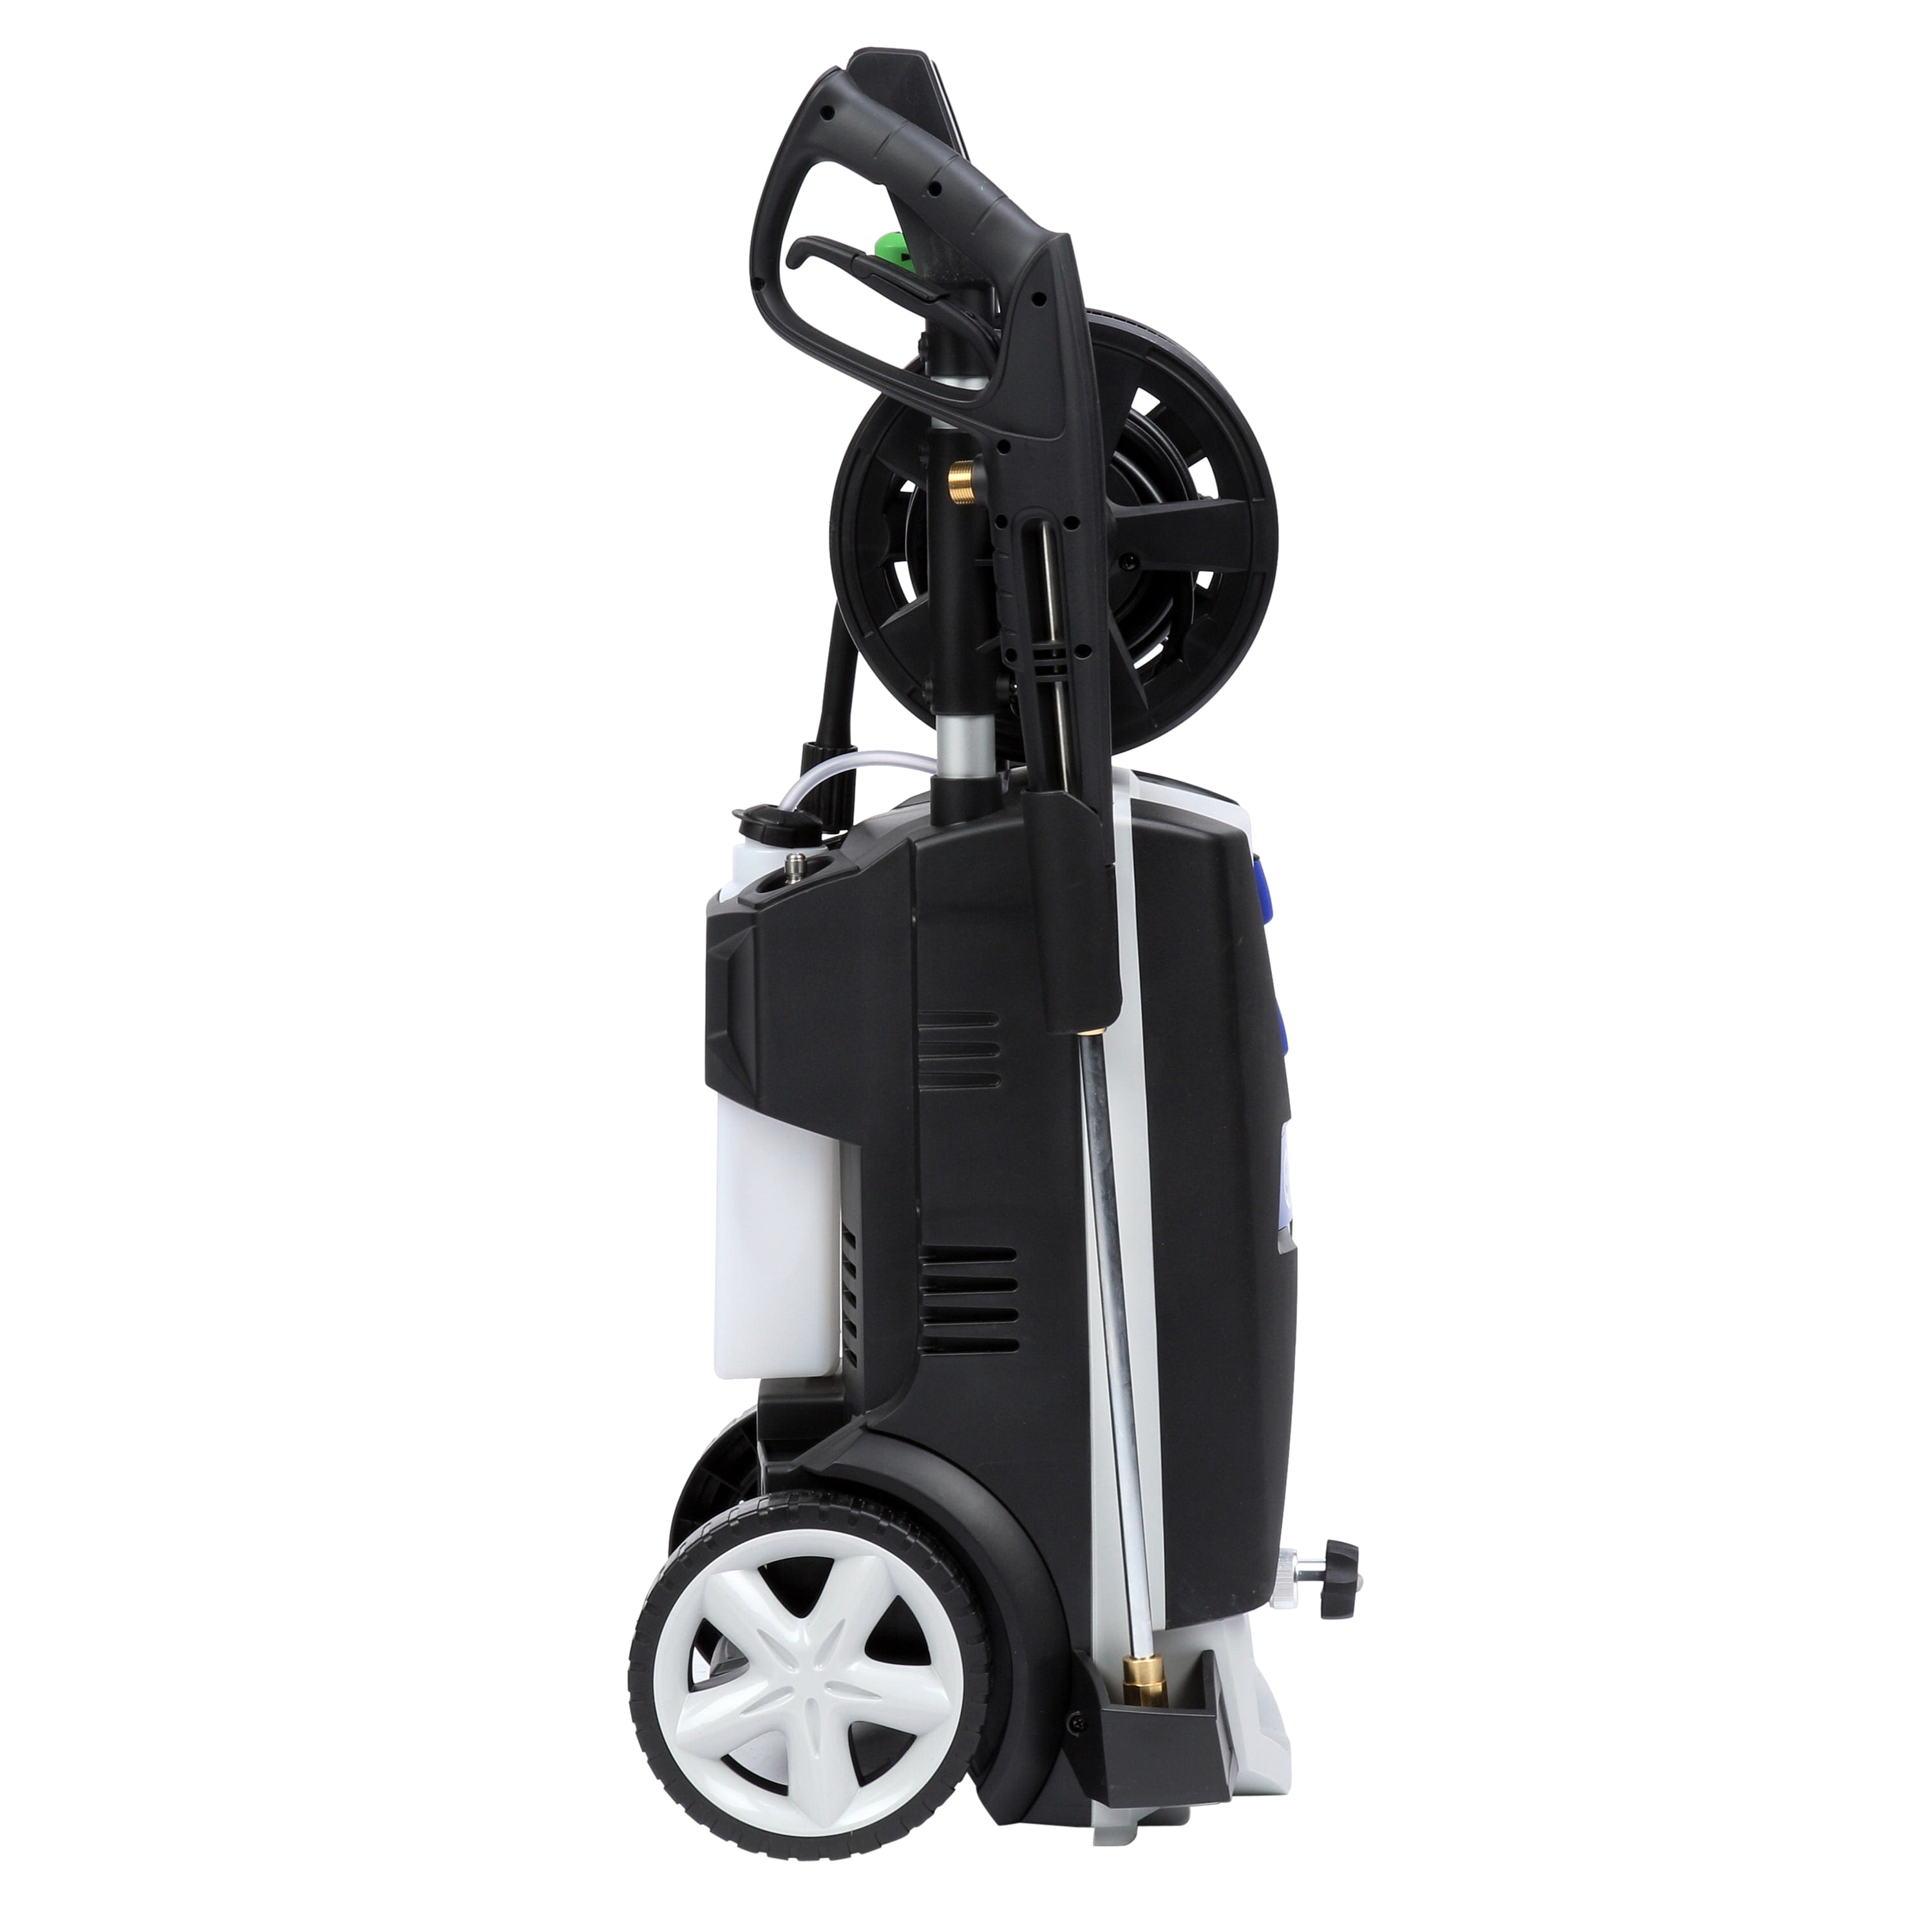 AR Blue Clean AR390SS Electric Pressure Washer - 2000 PSI, 1.4 GPM